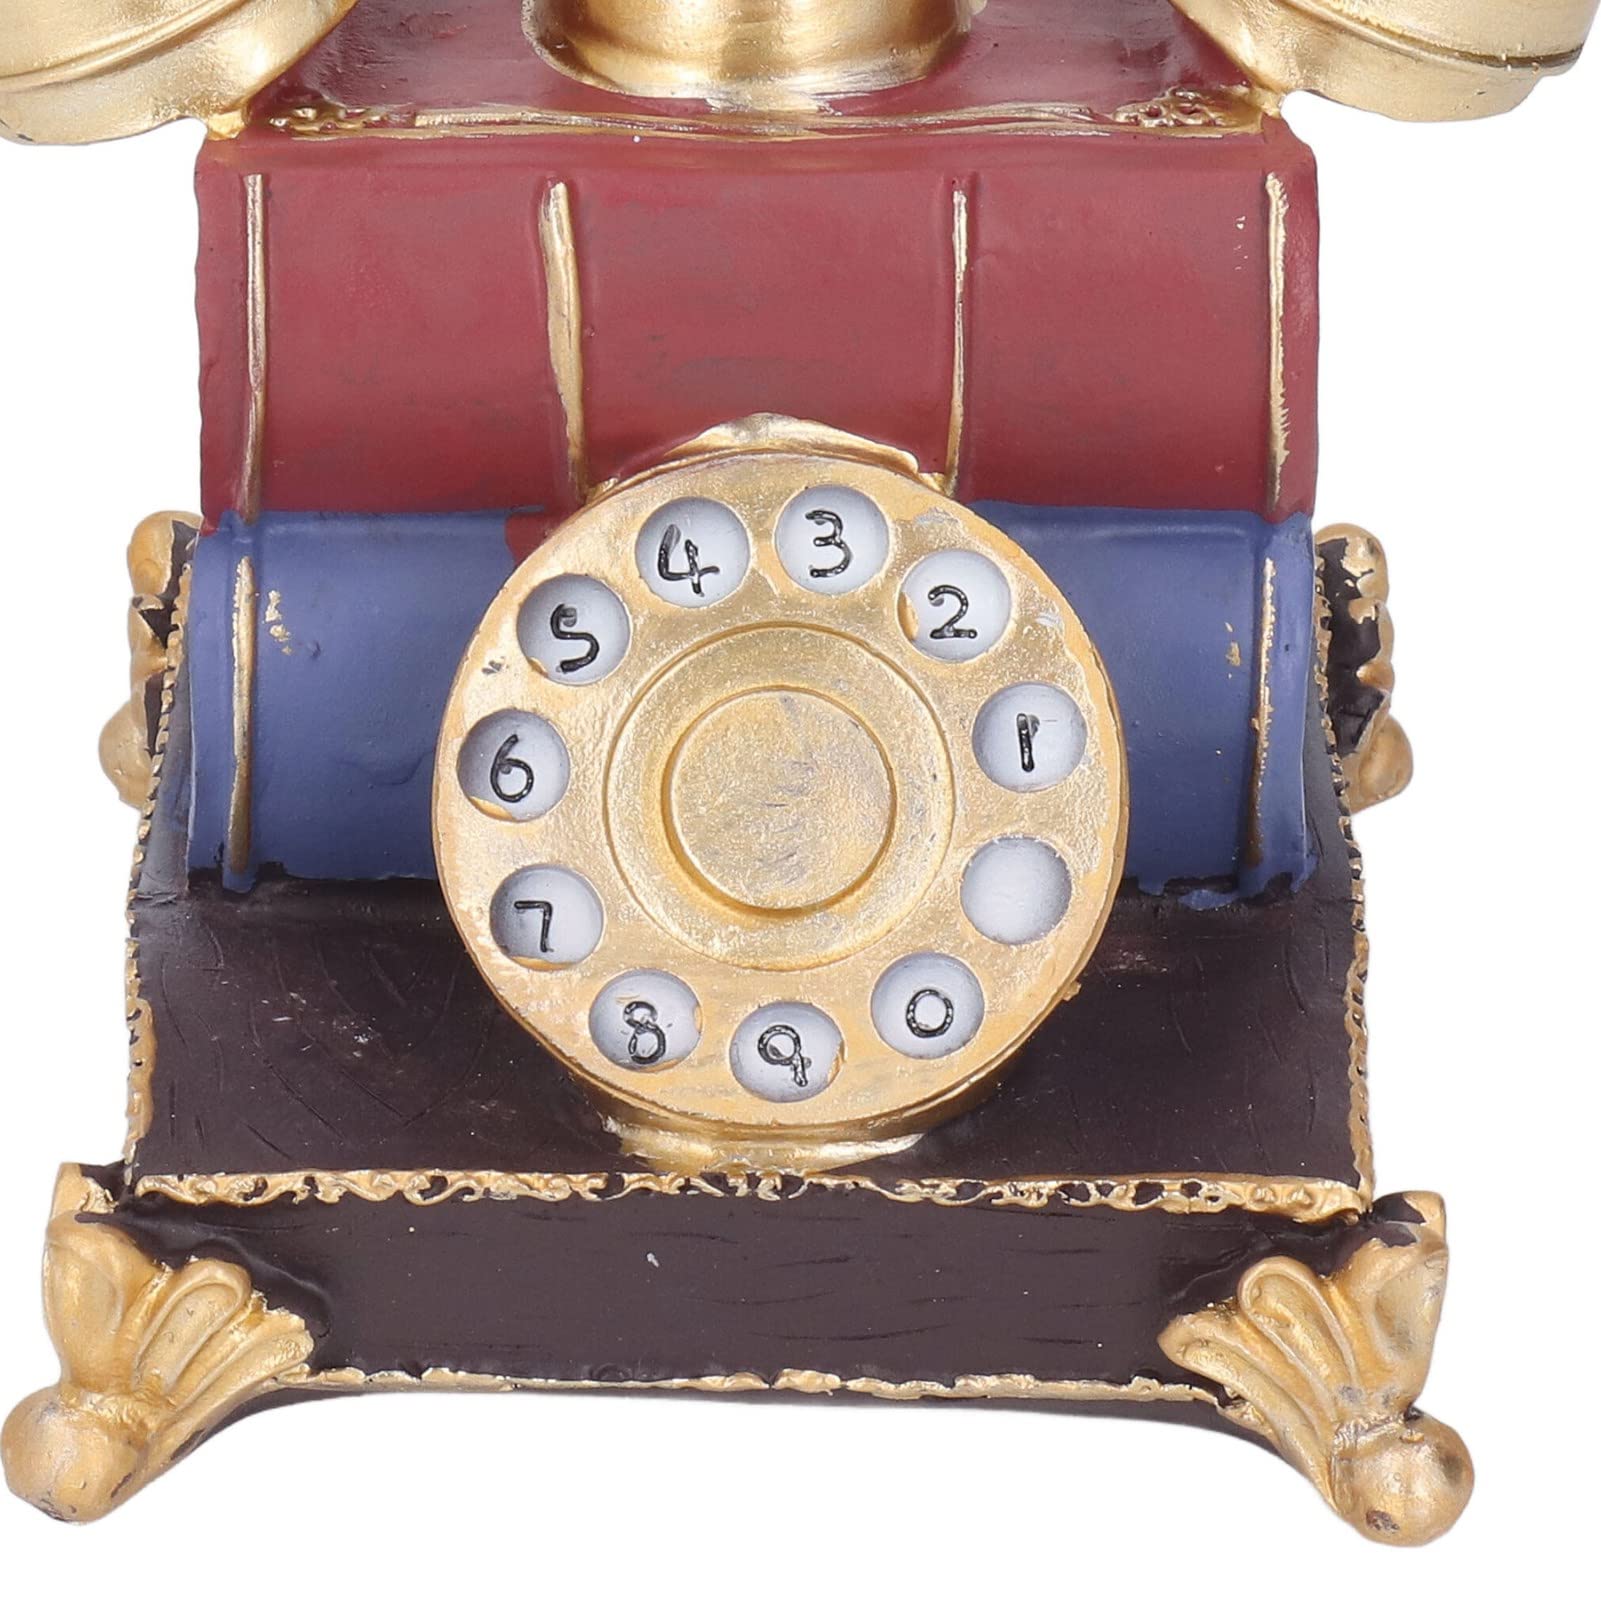 Naroote Vintage Phone Model, Retro Safe Resin Telephone Model Decoration Simulated for Store Window